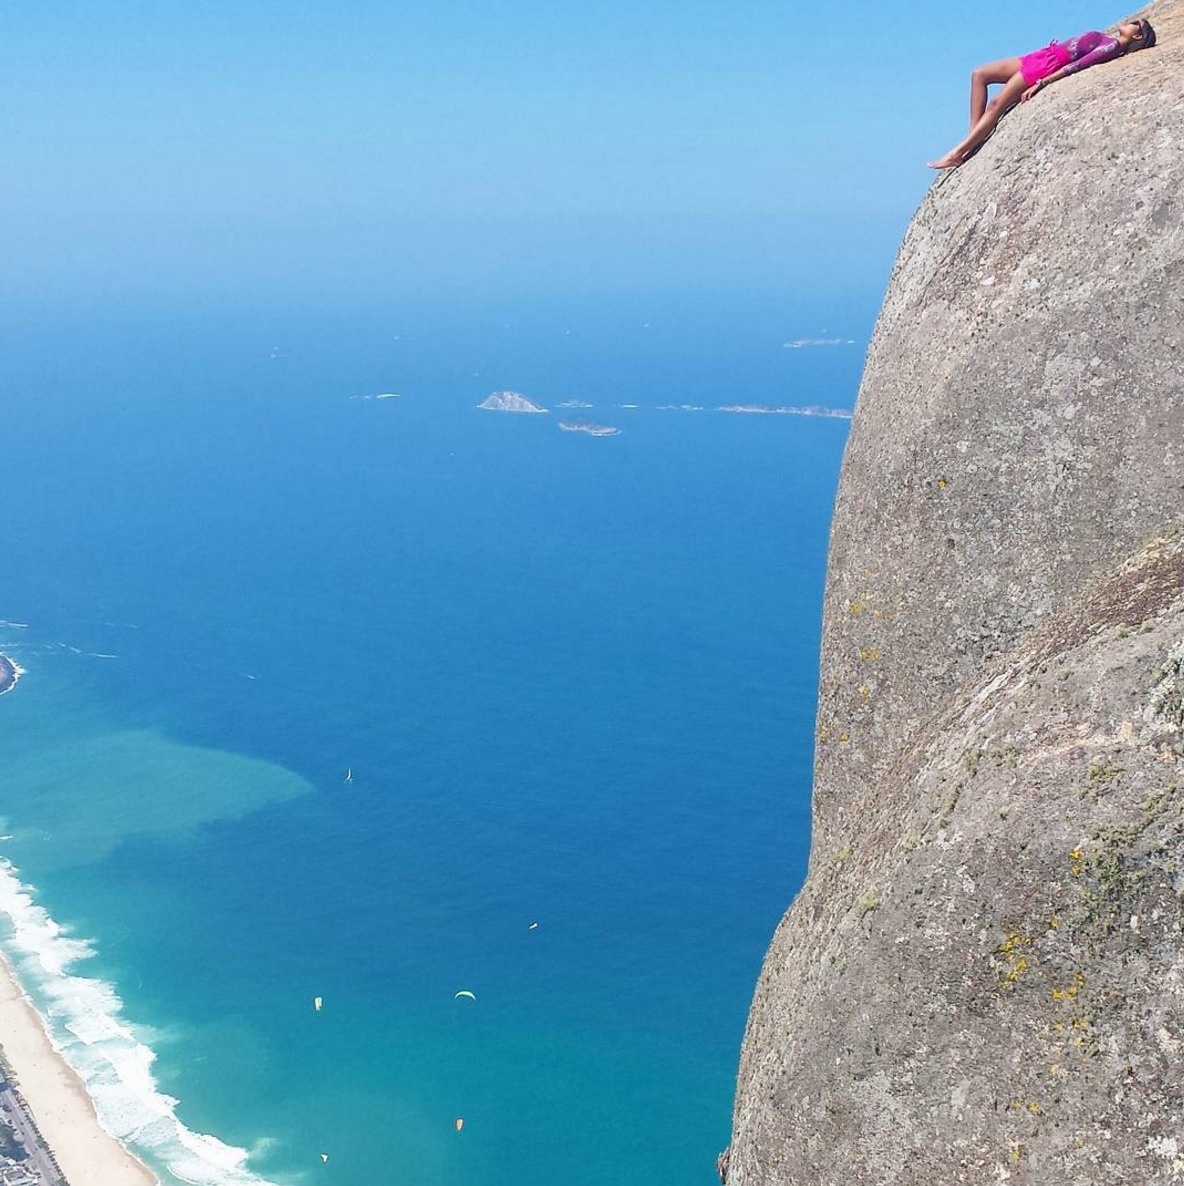 To take a nap on top of Pedra da Gavea, looking over Rio de Janeiro, tourists had to climb and hike for three hours to get there. 